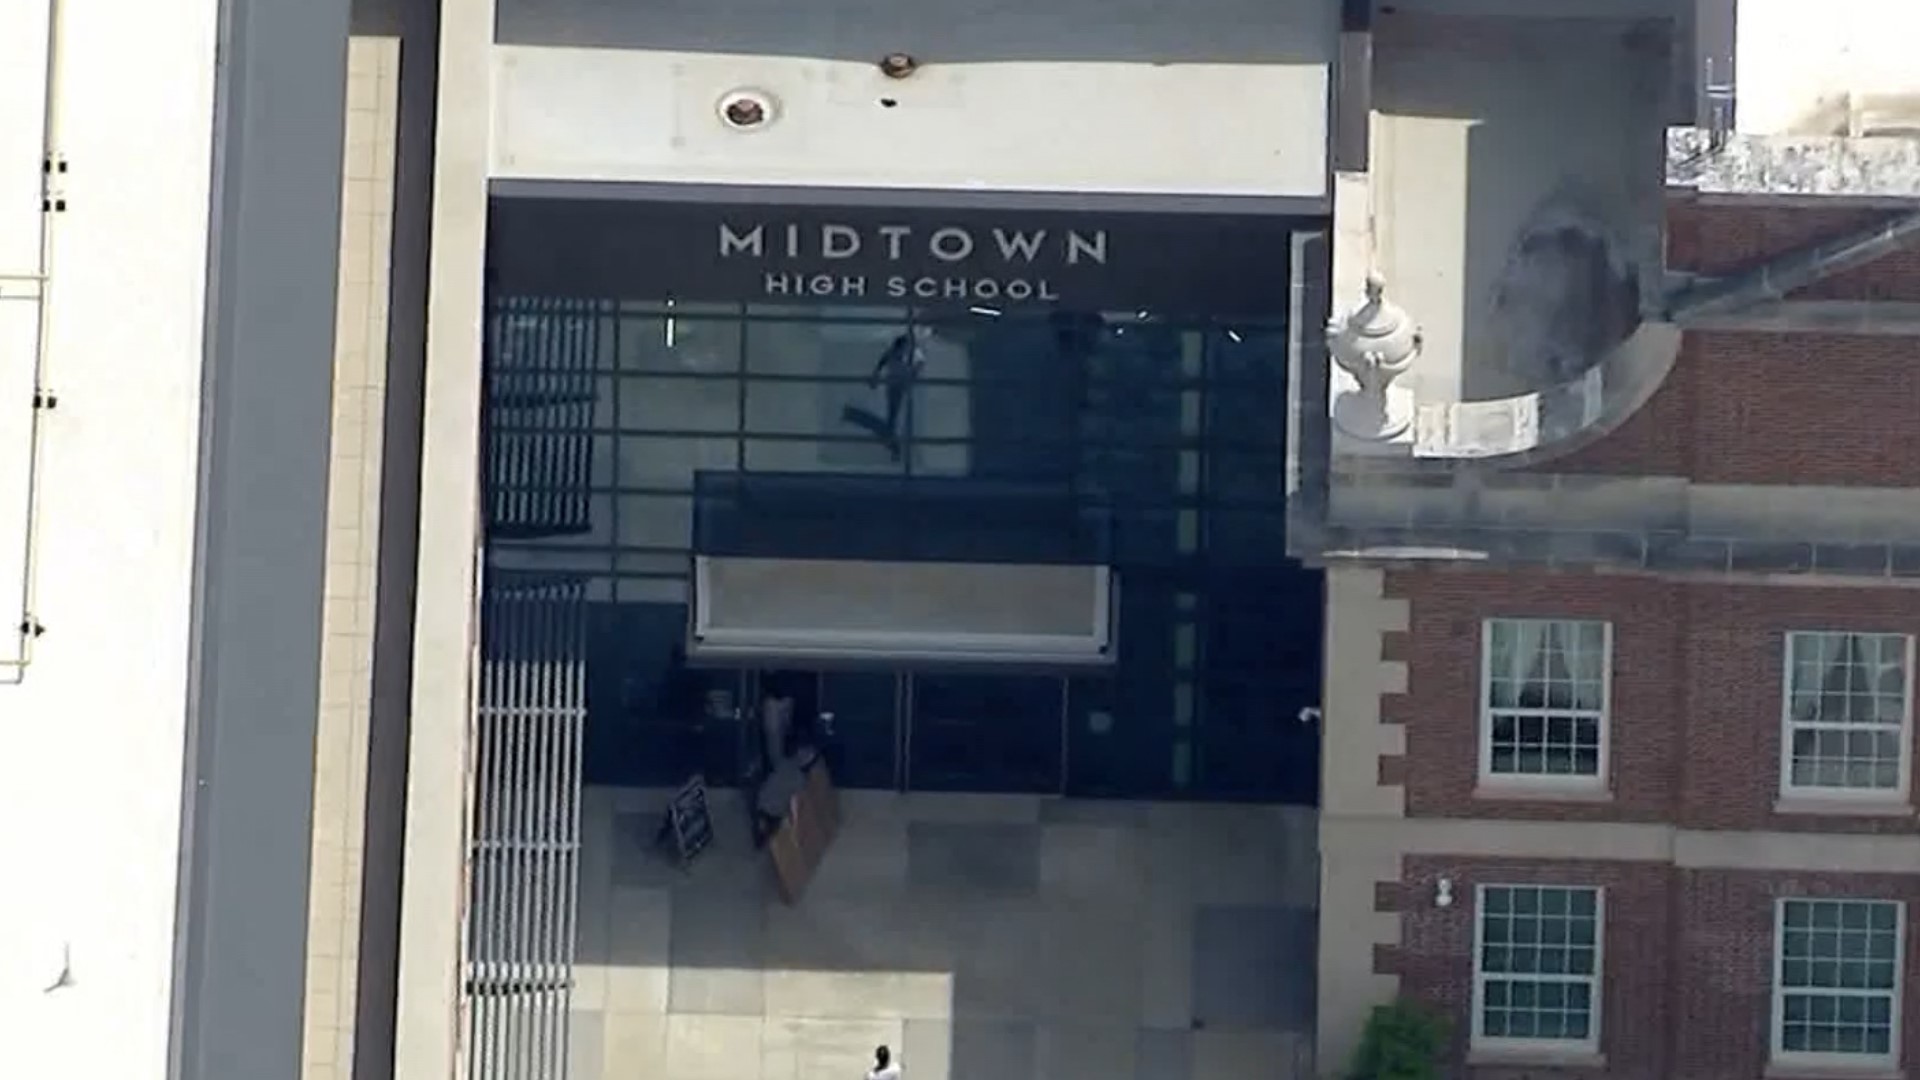 11Alive SkyTracker flew over the scene of Midtown High School after officials said they were placed on lockdown due to a 'hoax' threat on Wednesday.